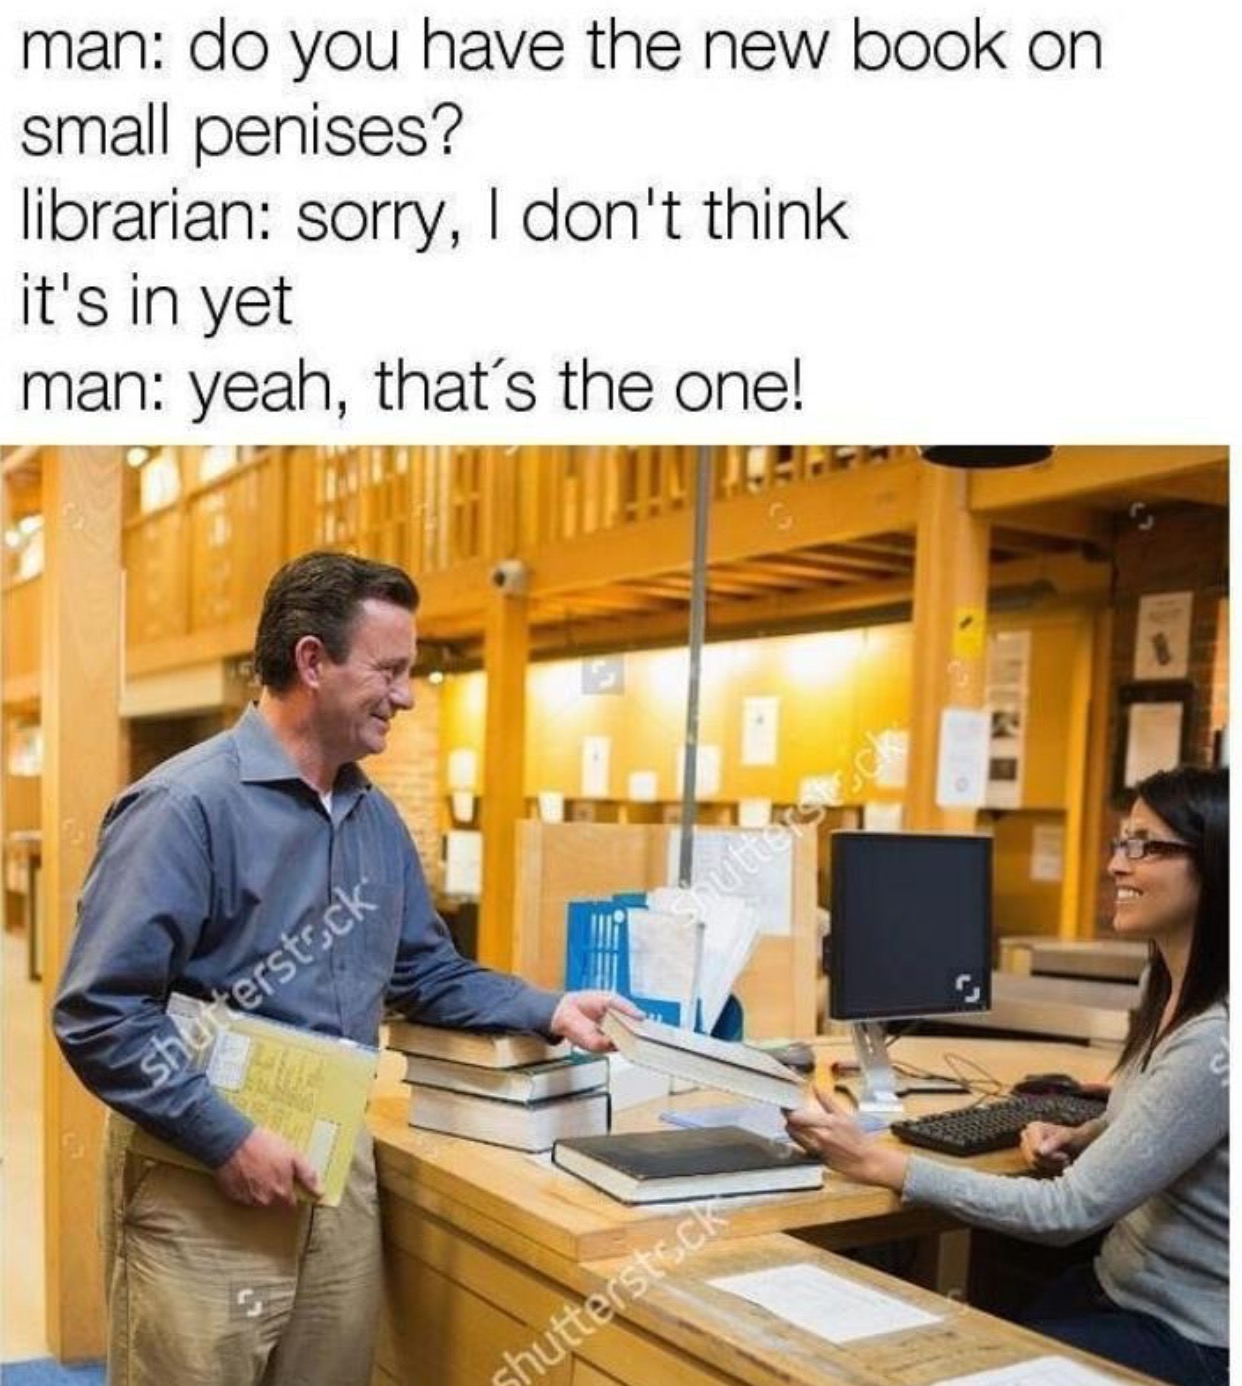 funny small cock memes - man do you have the new book on small penises? librarian sorry, I don't think it's in yet man yeah, that's the one! shutterstock shutterstock